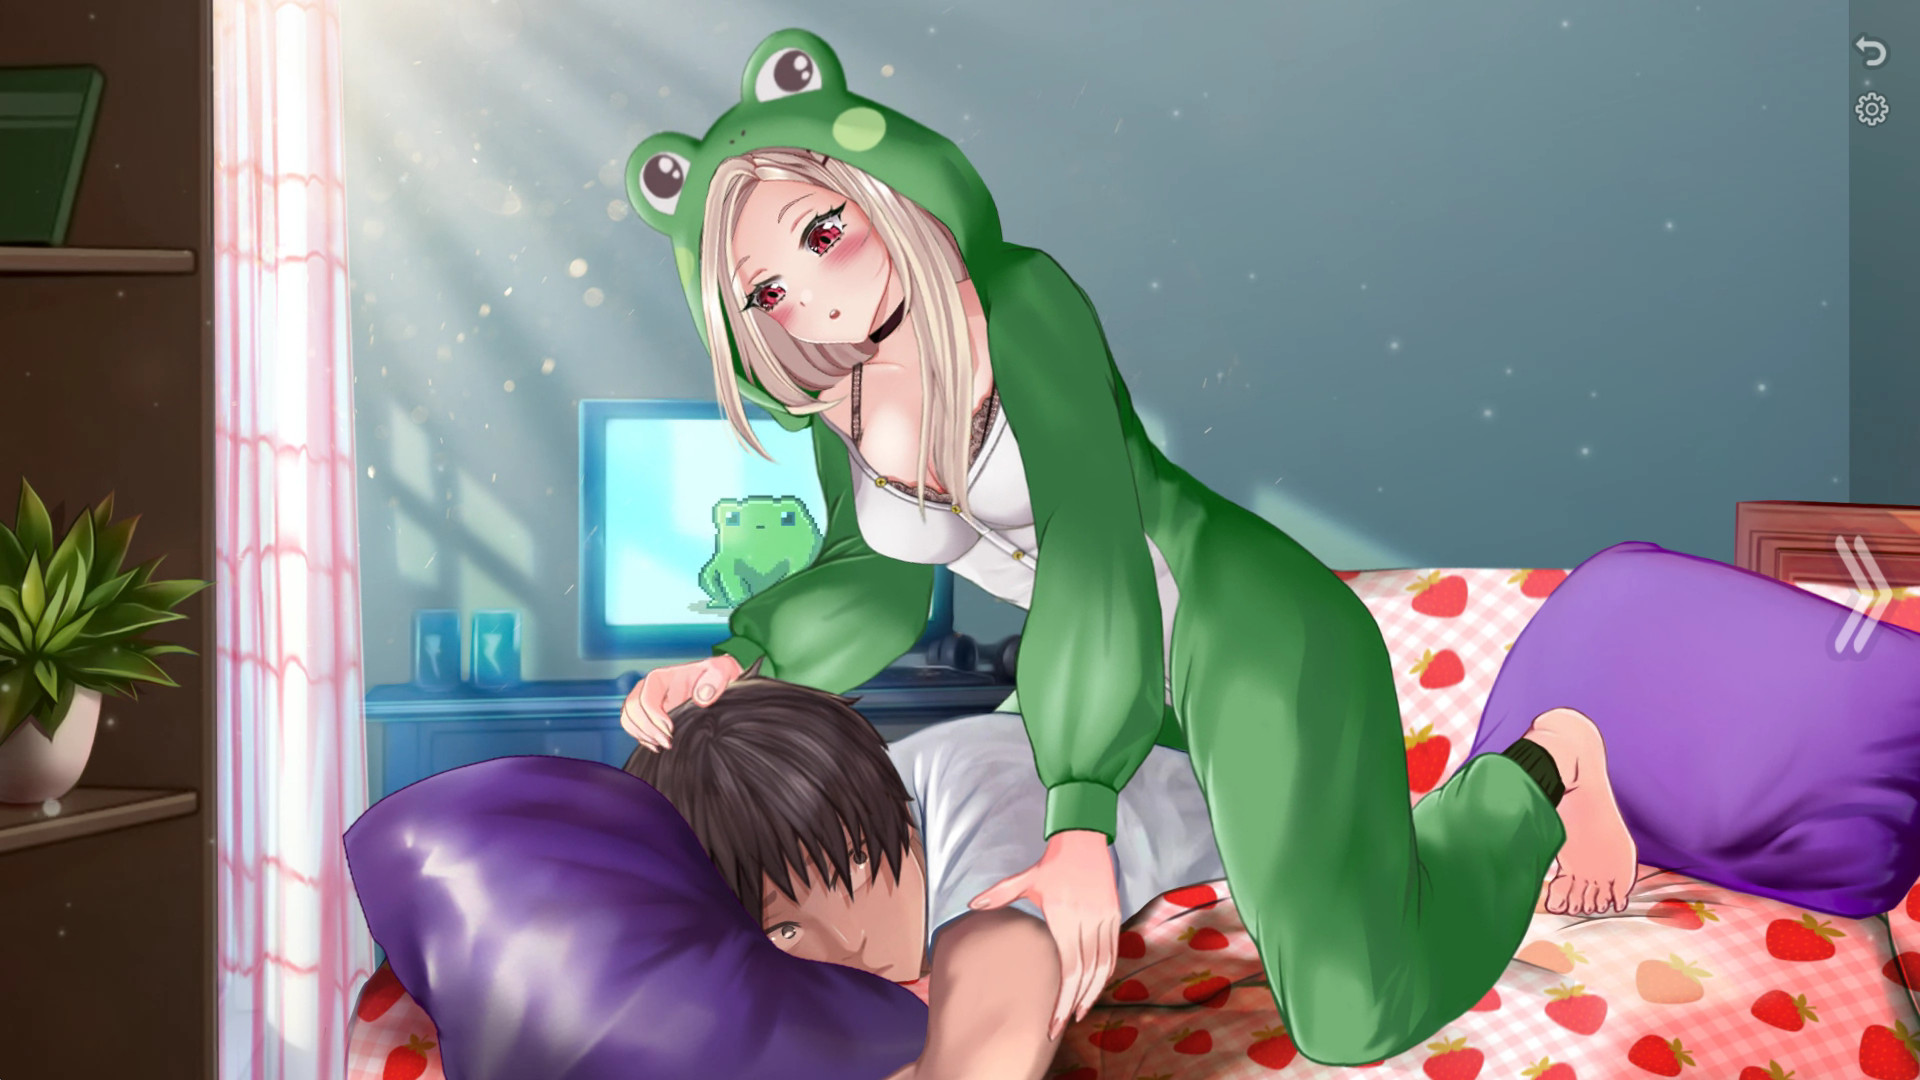 Find the best laptops for What if your girl was a frog?